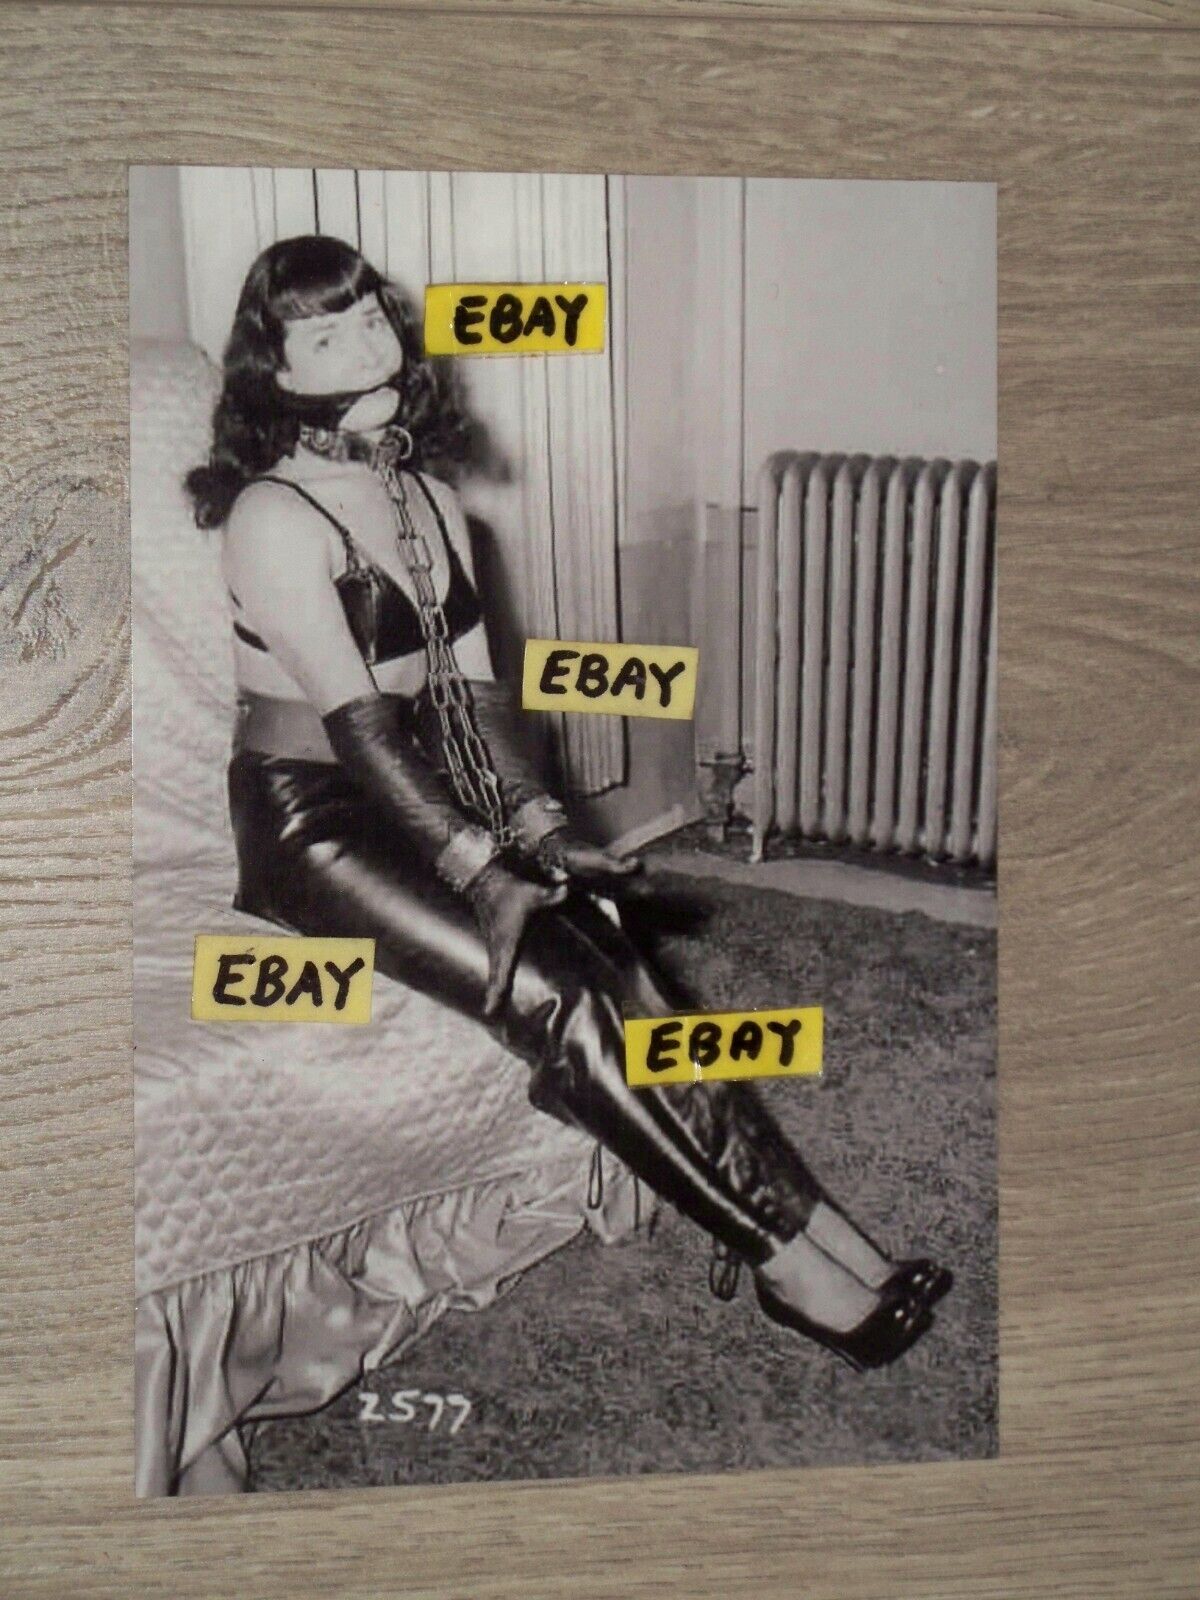 4X6 Vintage Artistic Bondage Photo Bettie Page Tied Up In Chains & Gagged On Bed